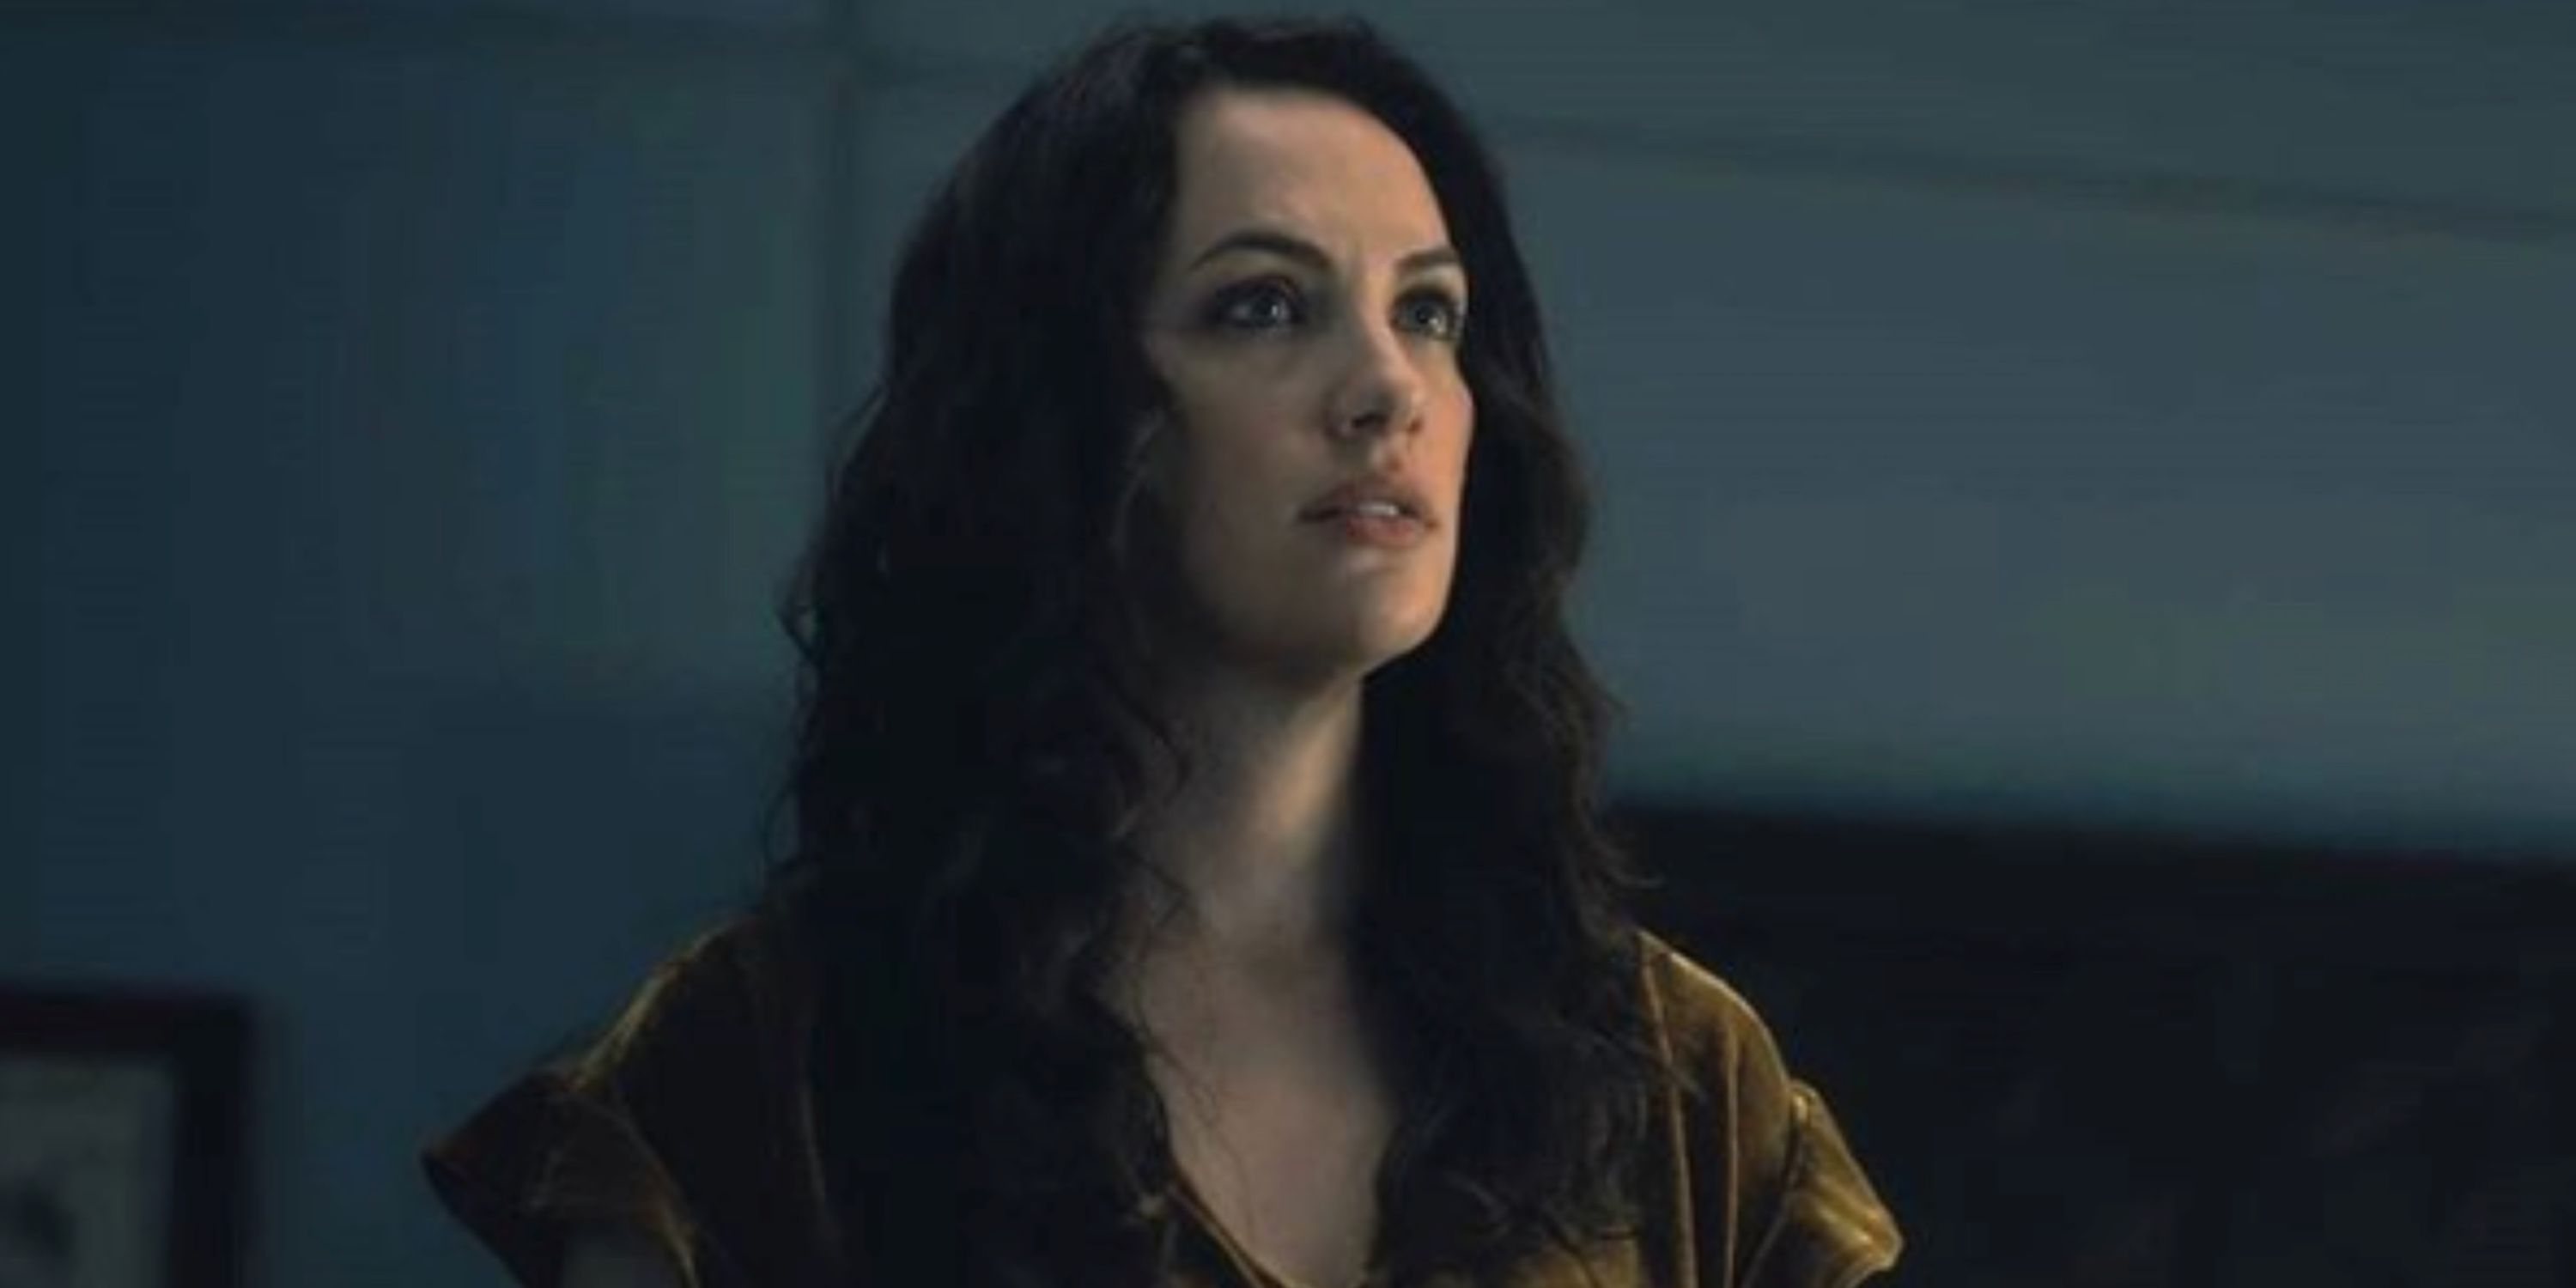 Kate Siegel in The Haunting of Hill House on Netflix